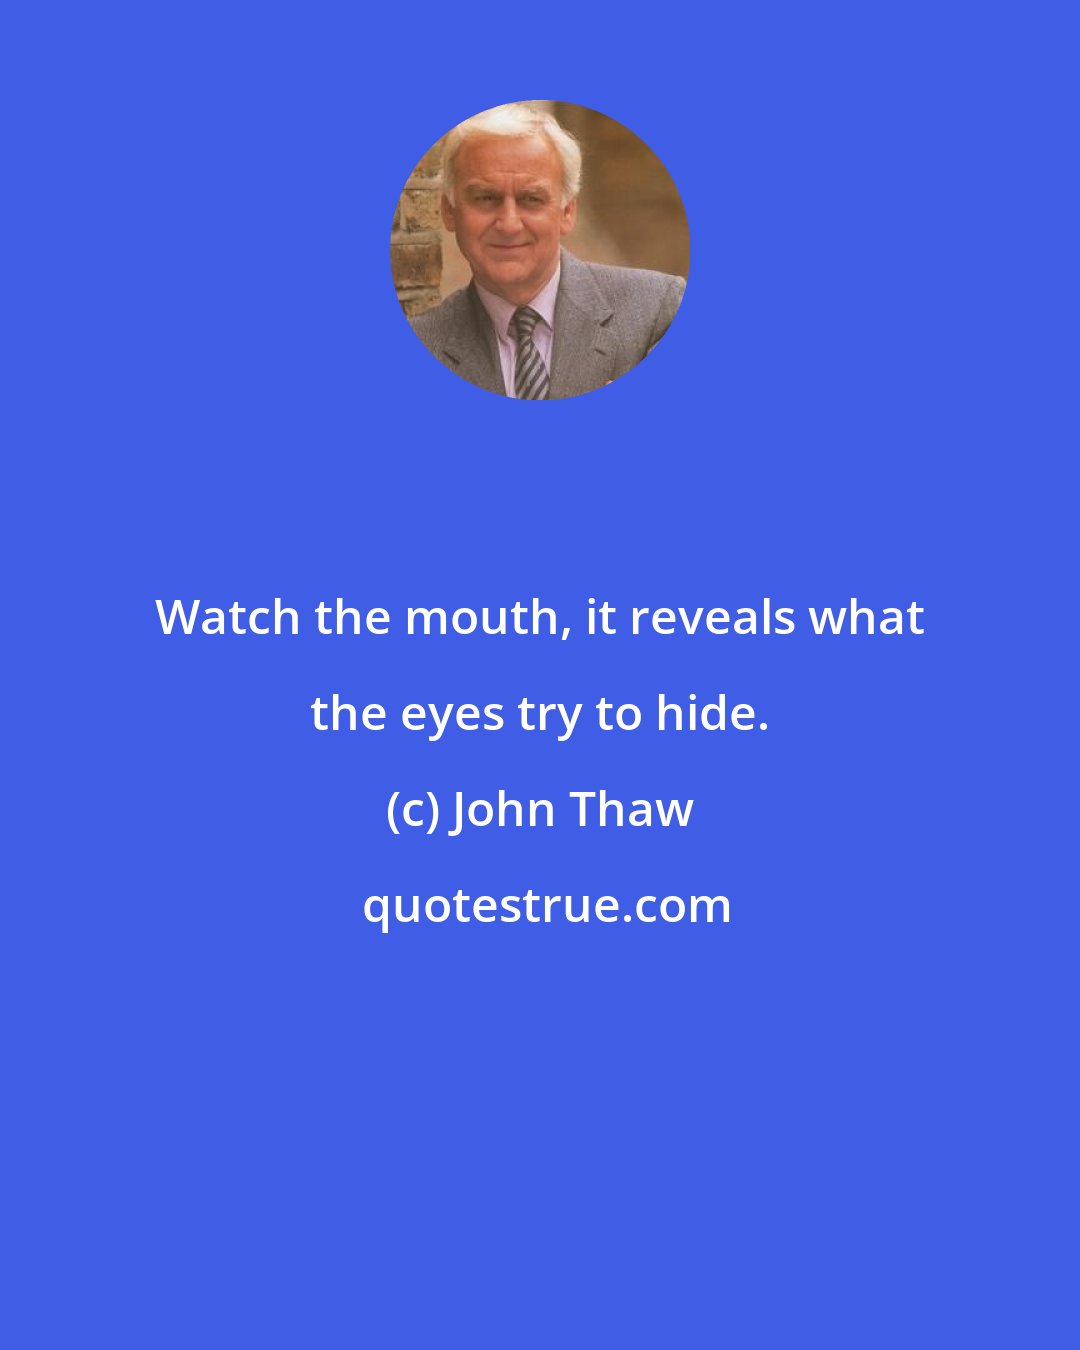 John Thaw: Watch the mouth, it reveals what the eyes try to hide.